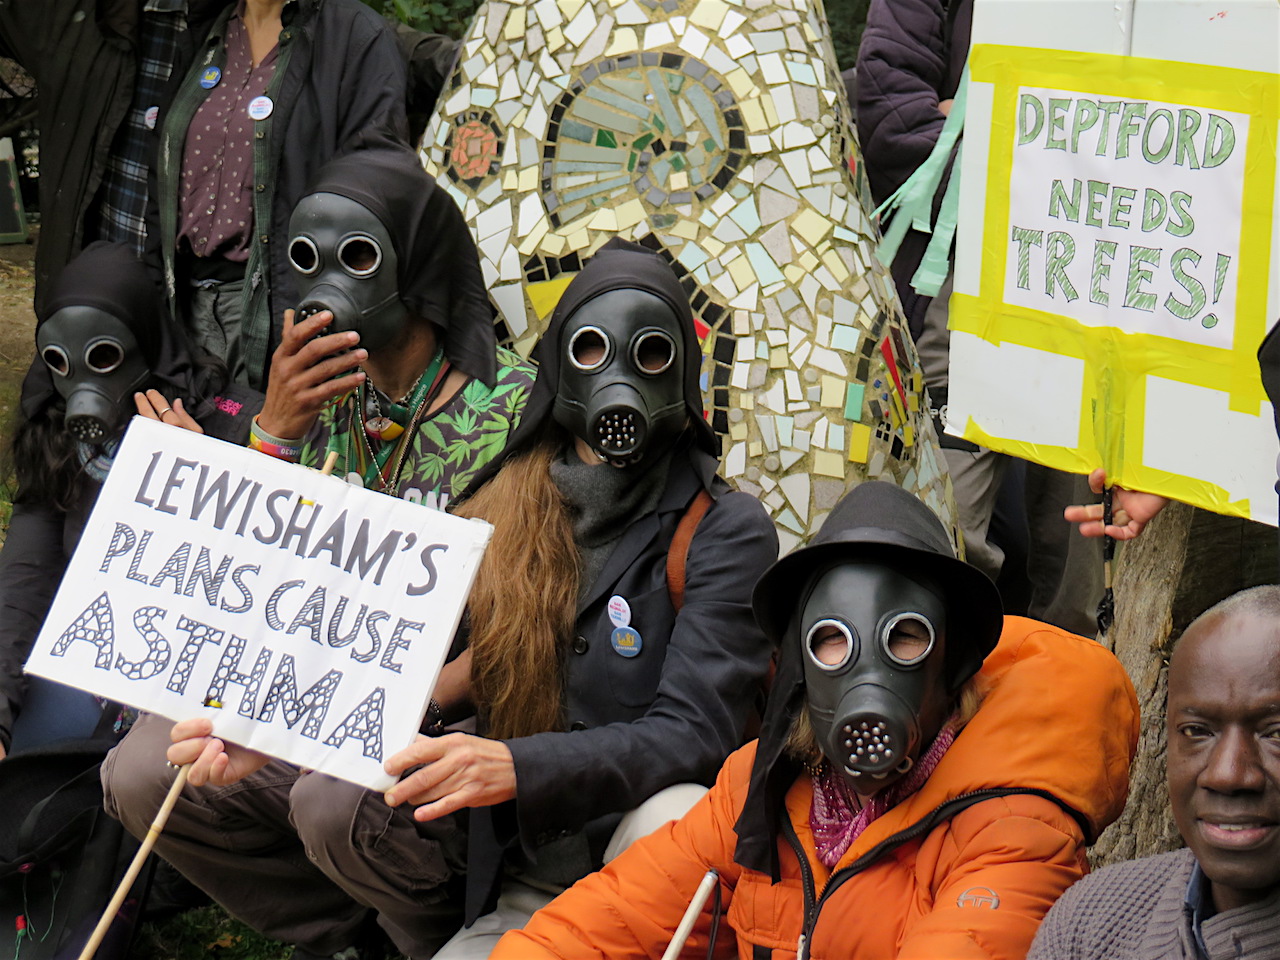 Save Reginald Save Tidemill campaigners photographed wearing gas masks to highlight the environmental costs of the proposed re-development of the old Tidemill school site, including the Old Tidemill Wildlife Garden (Photo: Andy Worthington).